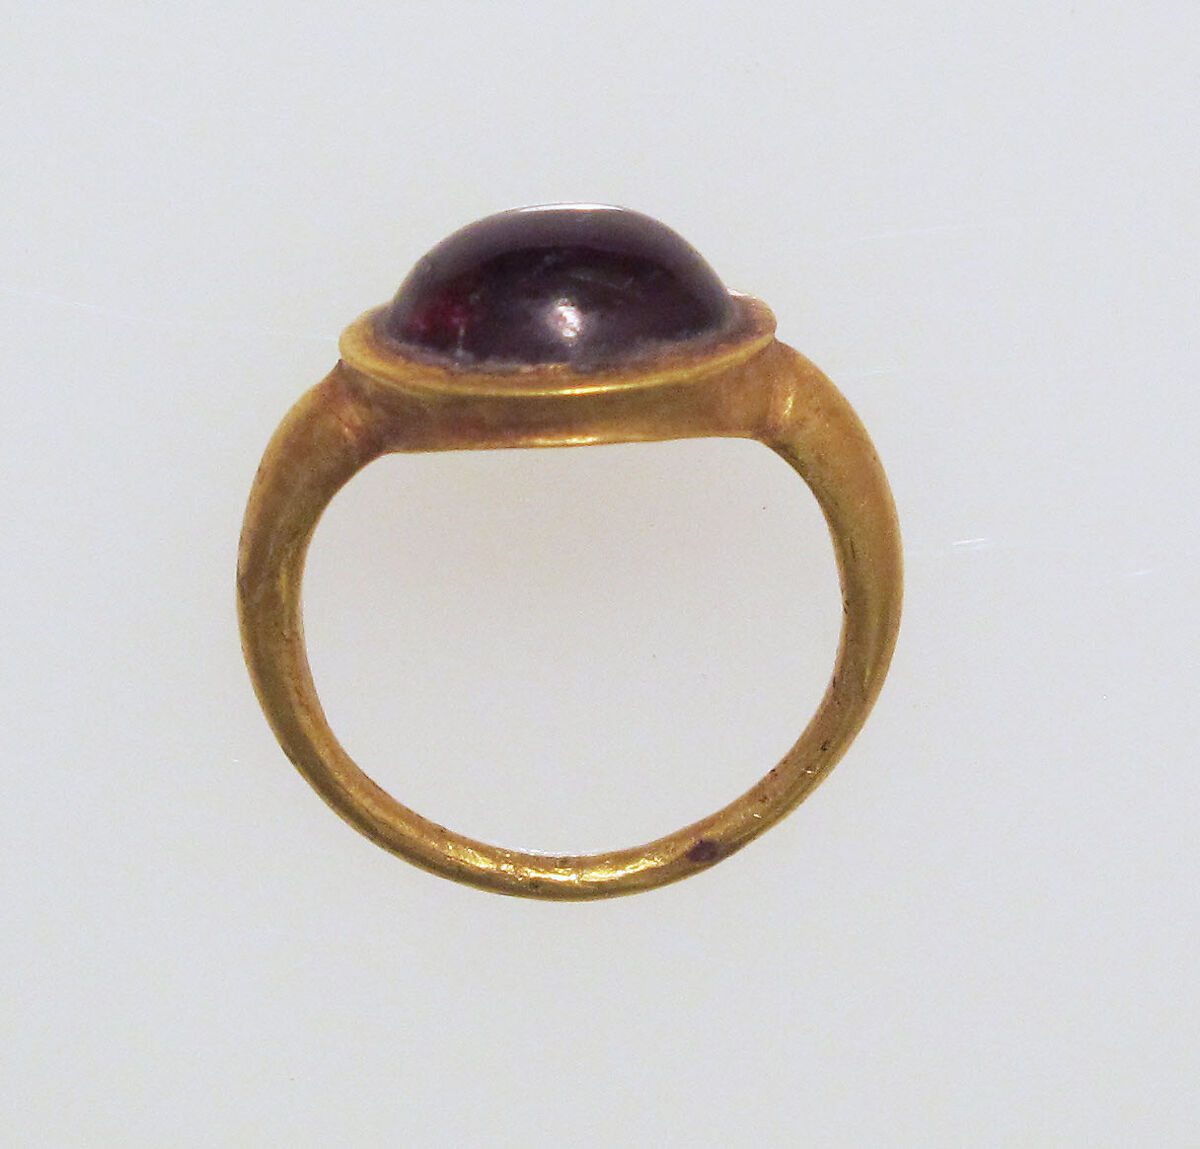 Ring with carbuncle, Gold, carbuncle 